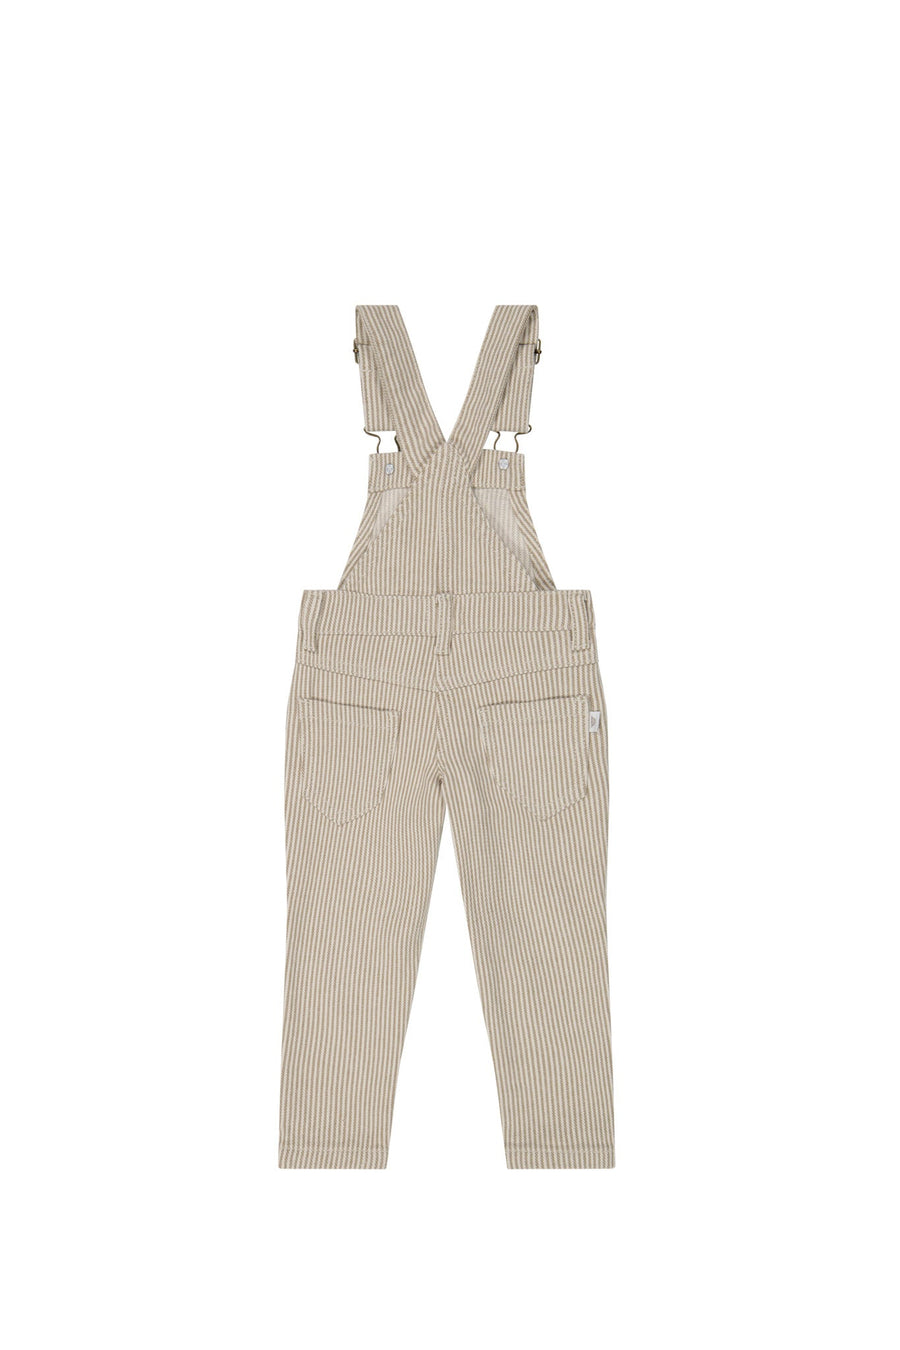 Jordie Cotton Twill Overall - Balm/Cloud Stripe Childrens Overall from Jamie Kay USA